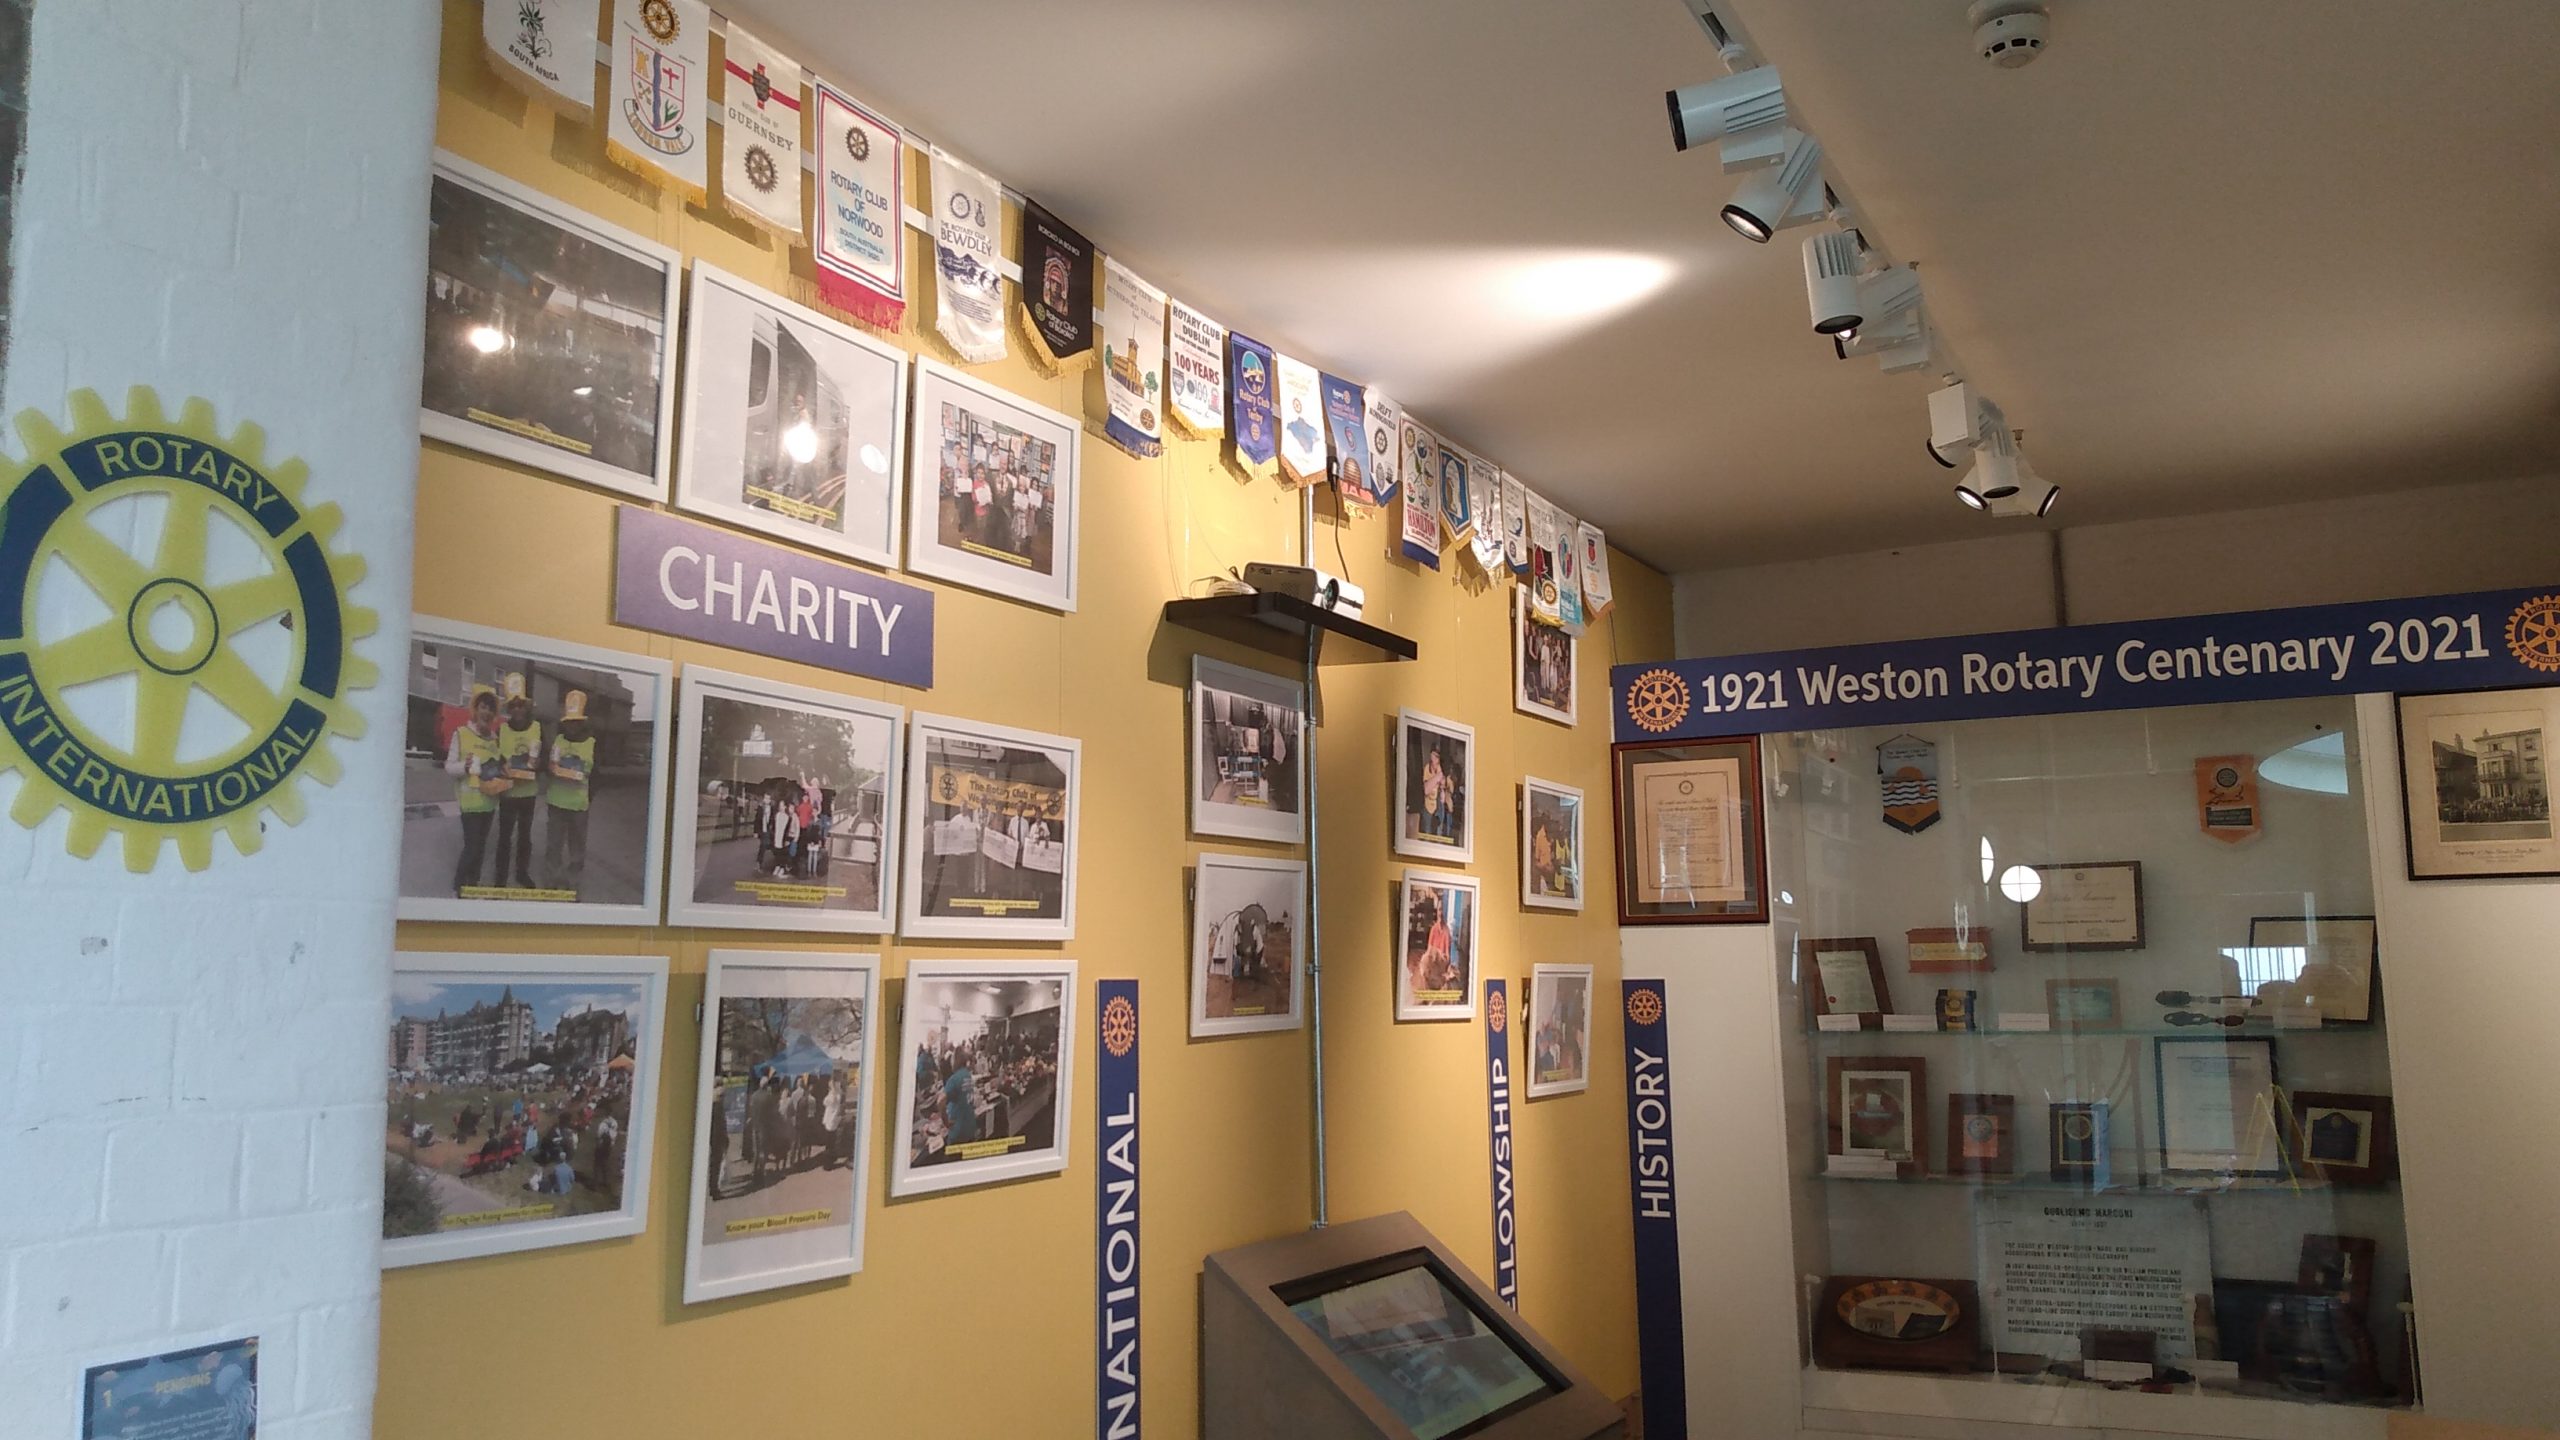 a photograph of the Rotary Club exhibition